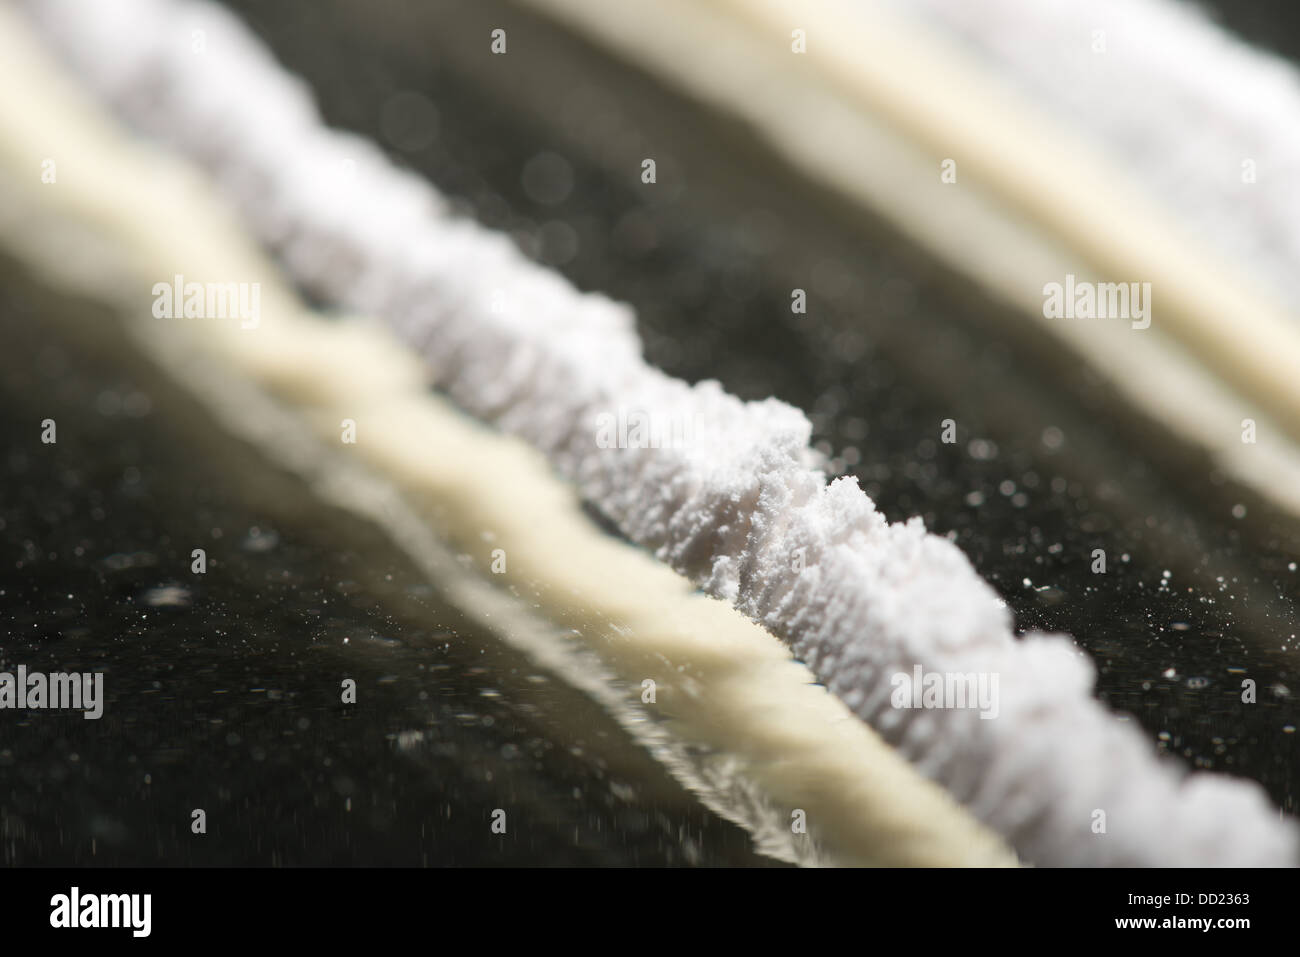 Drug addiction lines rows of powdered cocaine ready to be snorted representing a bad drug habit out of control life destroying Stock Photo